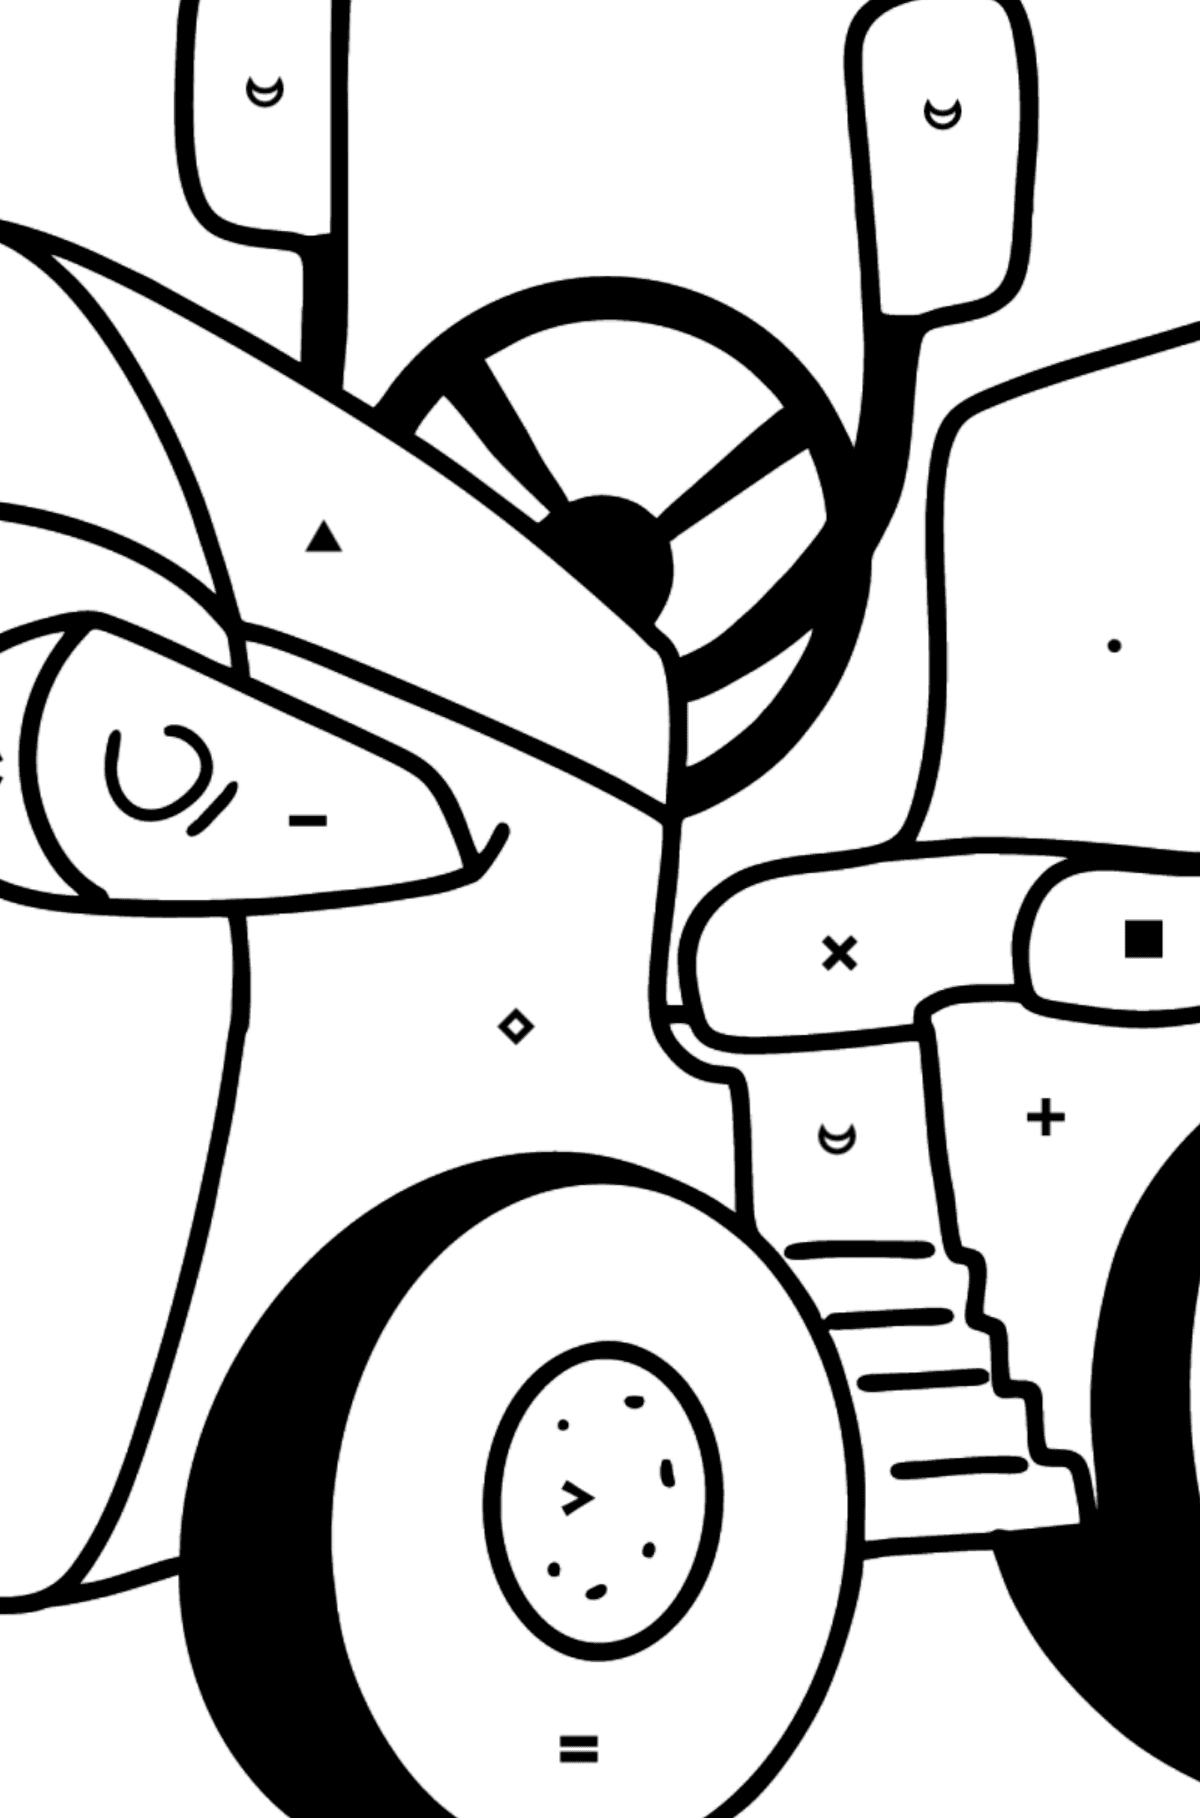 T-15 Mini Tractor Fighter coloring page - Coloring by Symbols for Kids